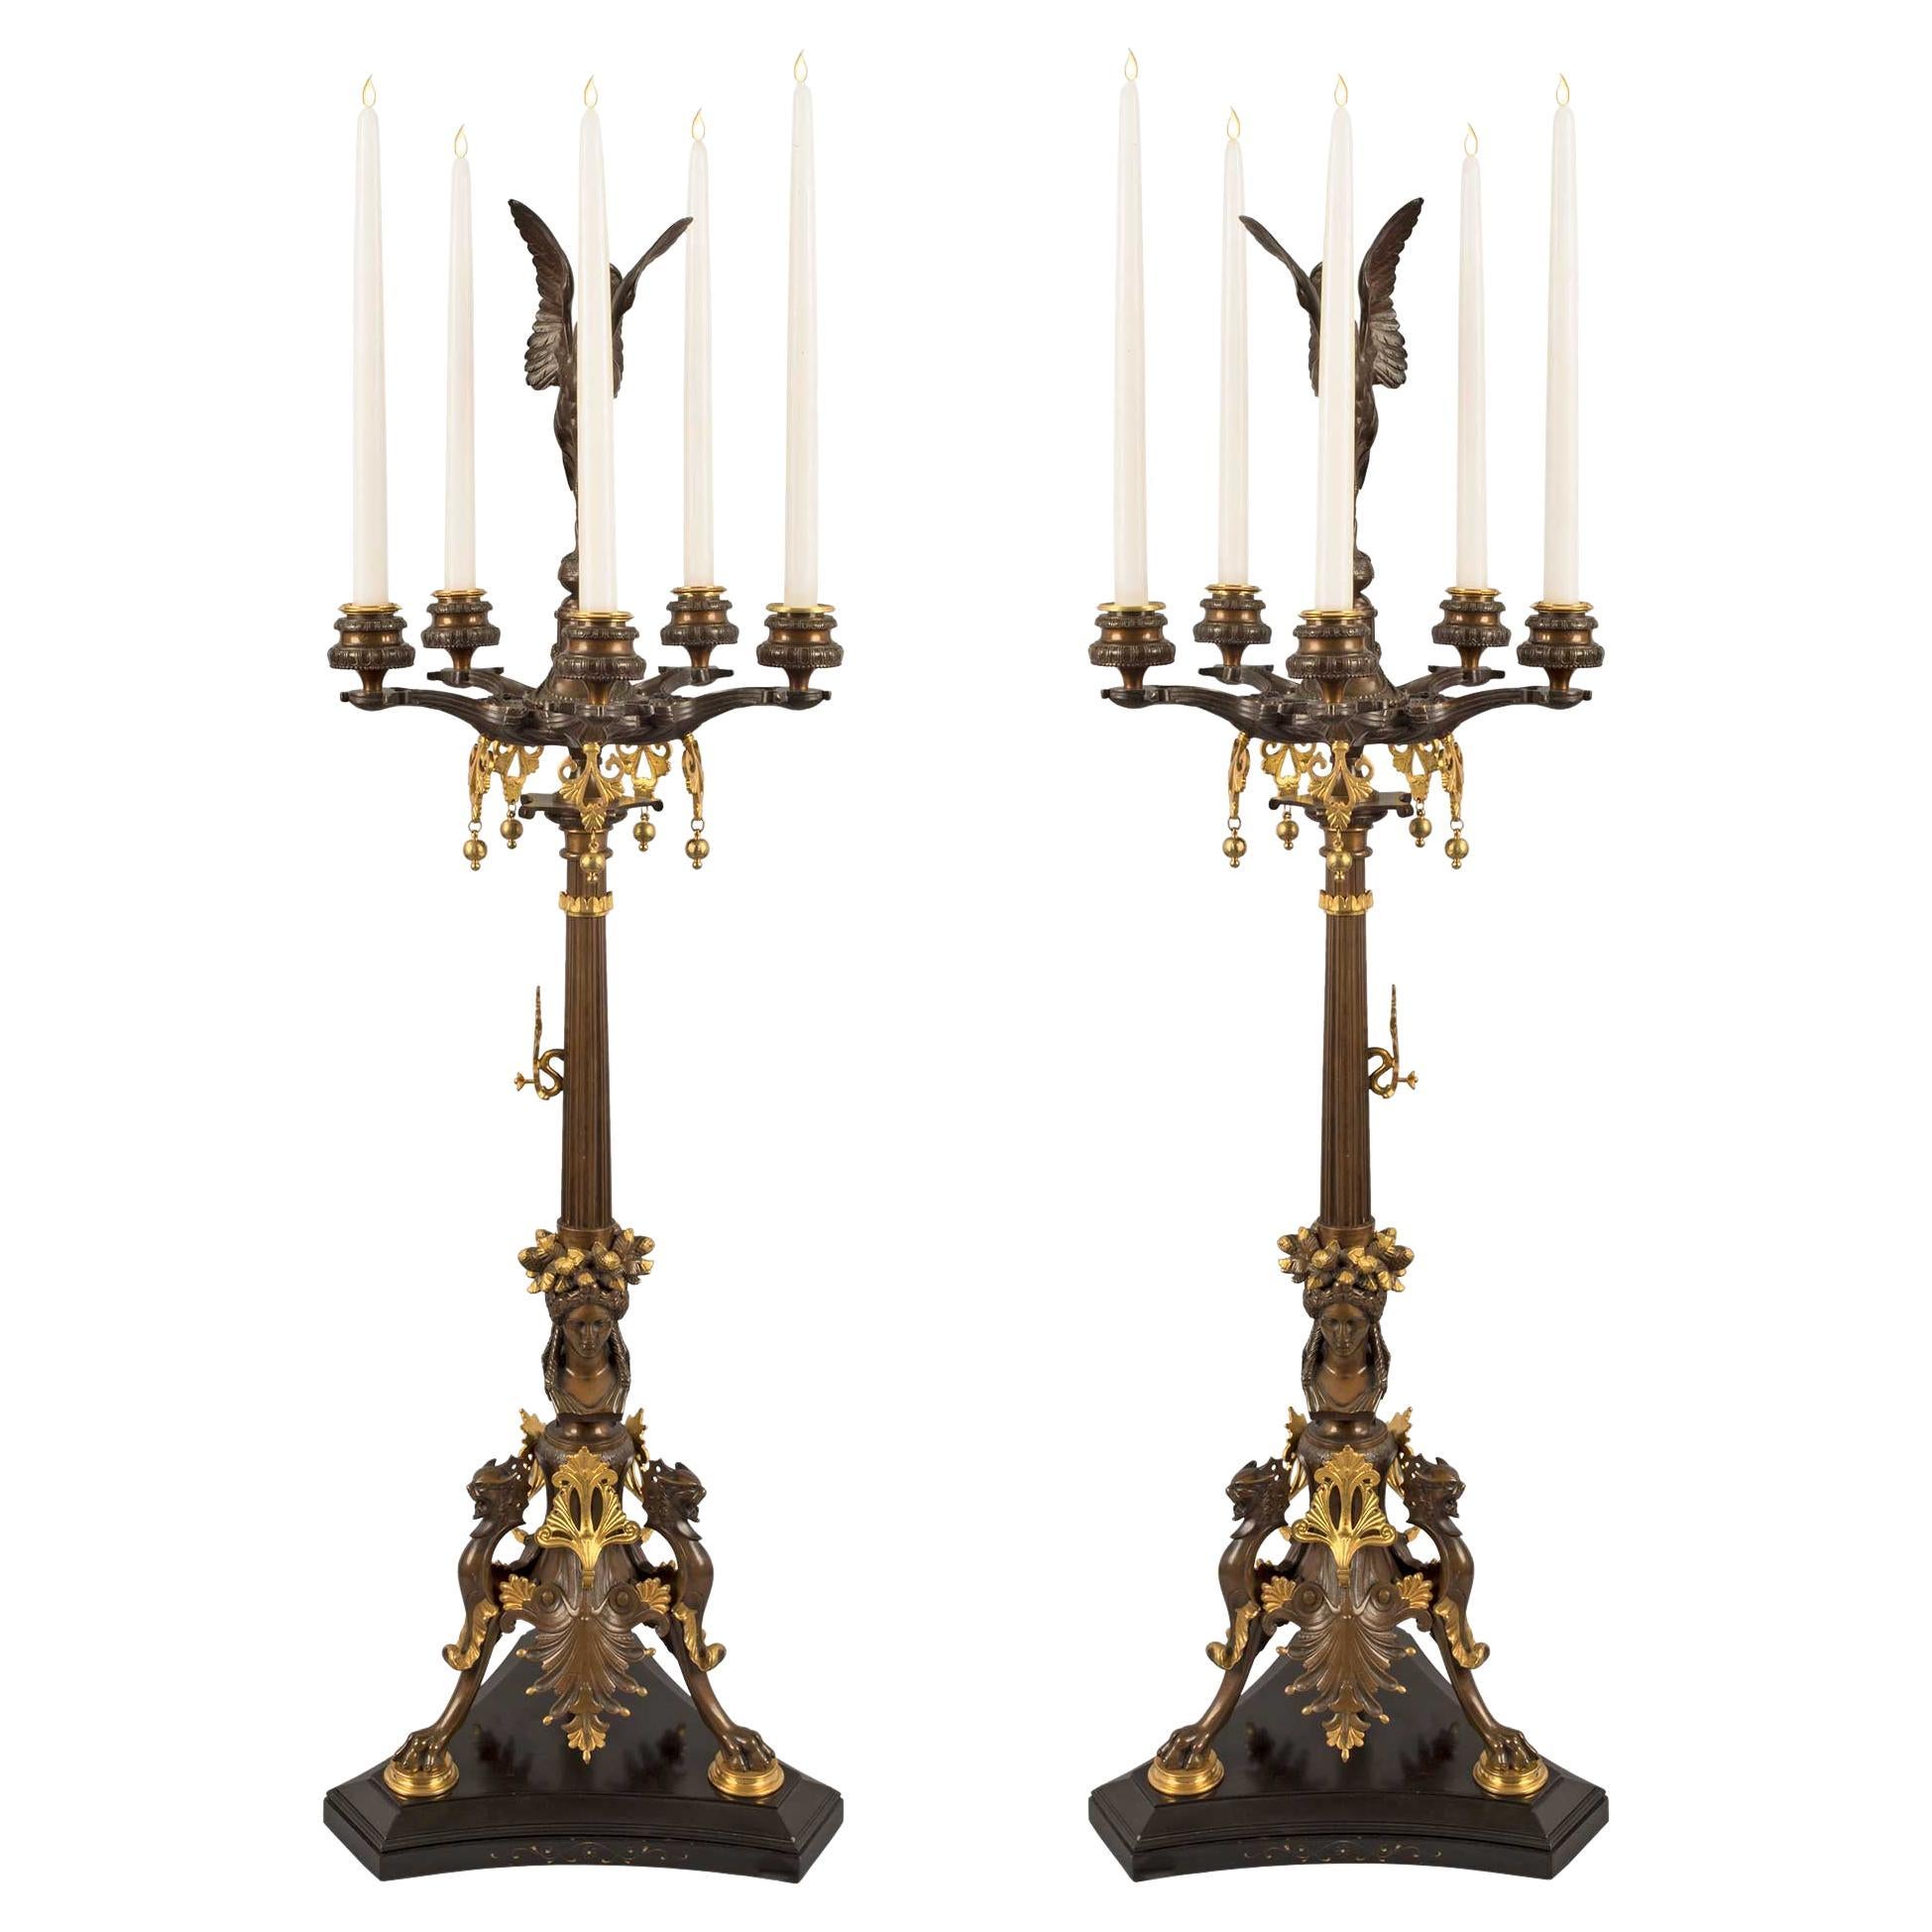 French 19th Century Renaissance Style Ormolu and Patinated Bronze Candelabras